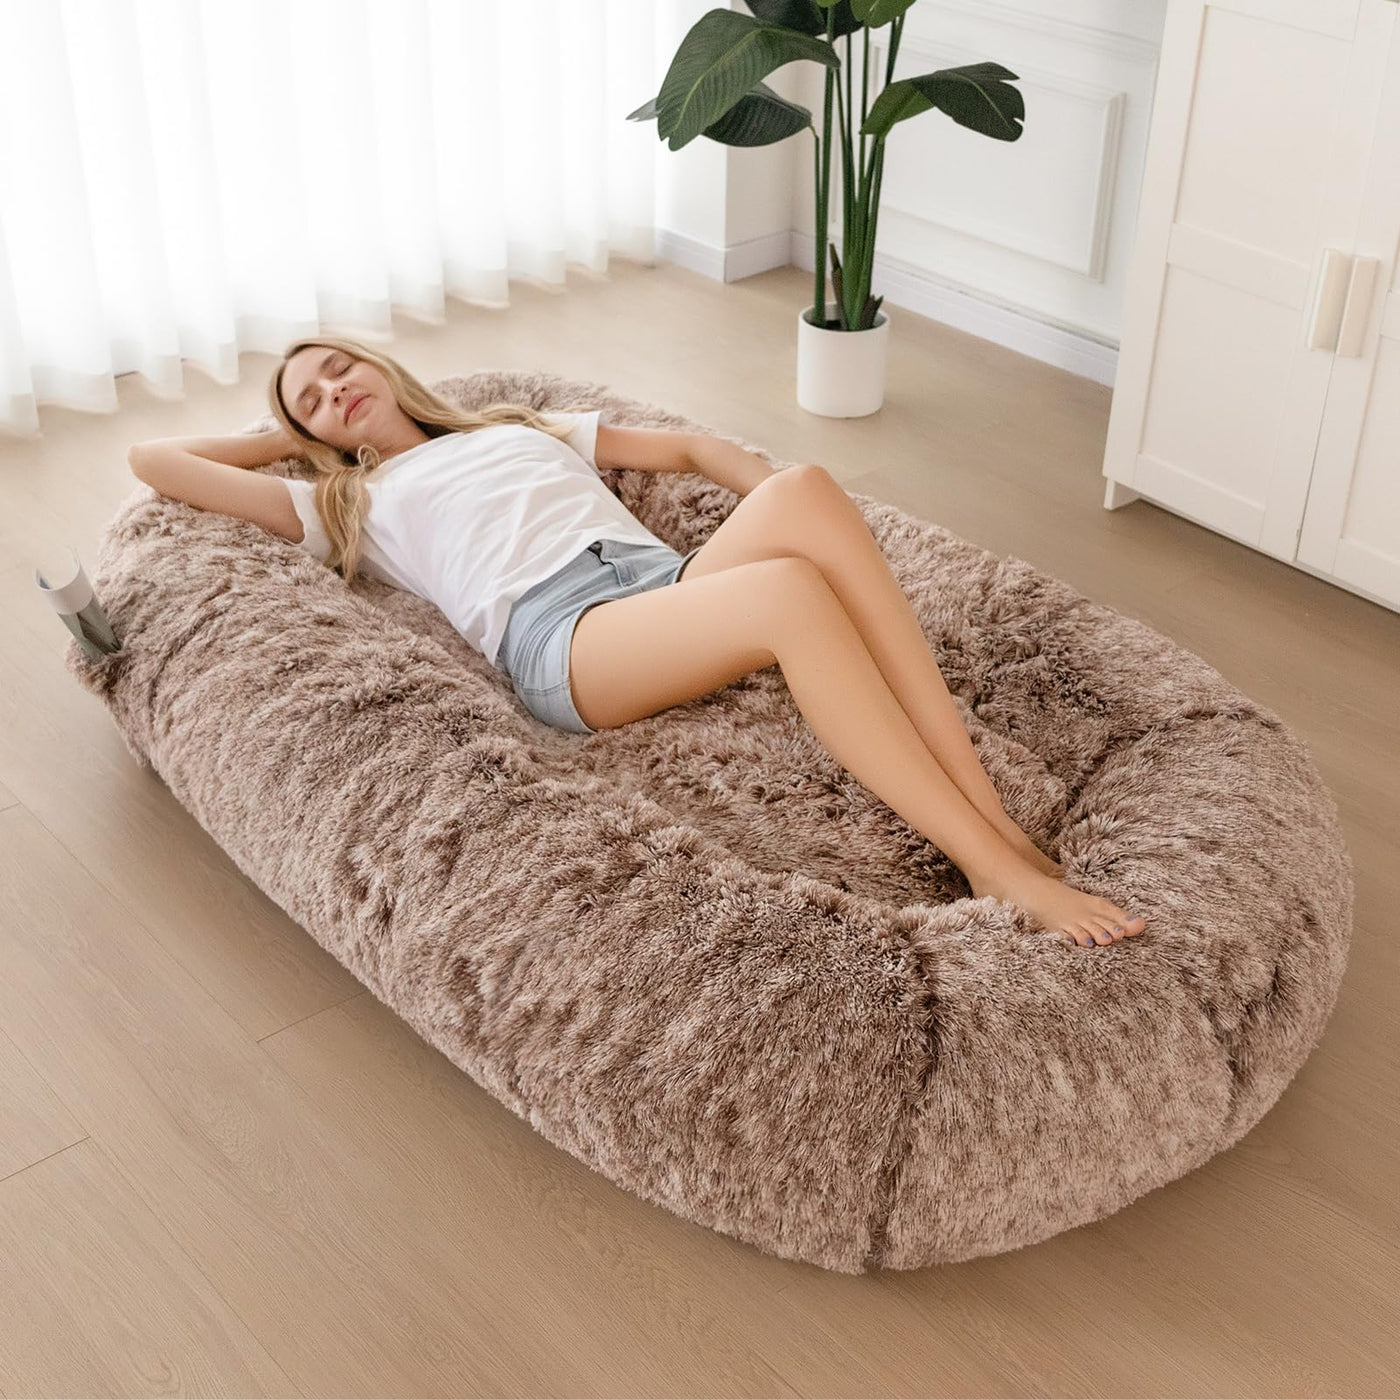 MAXYOYO Human Dog Bed, Long Faux Fur Giant Bean Bag Bed for Humans and Pets, Faux Fur Coffee